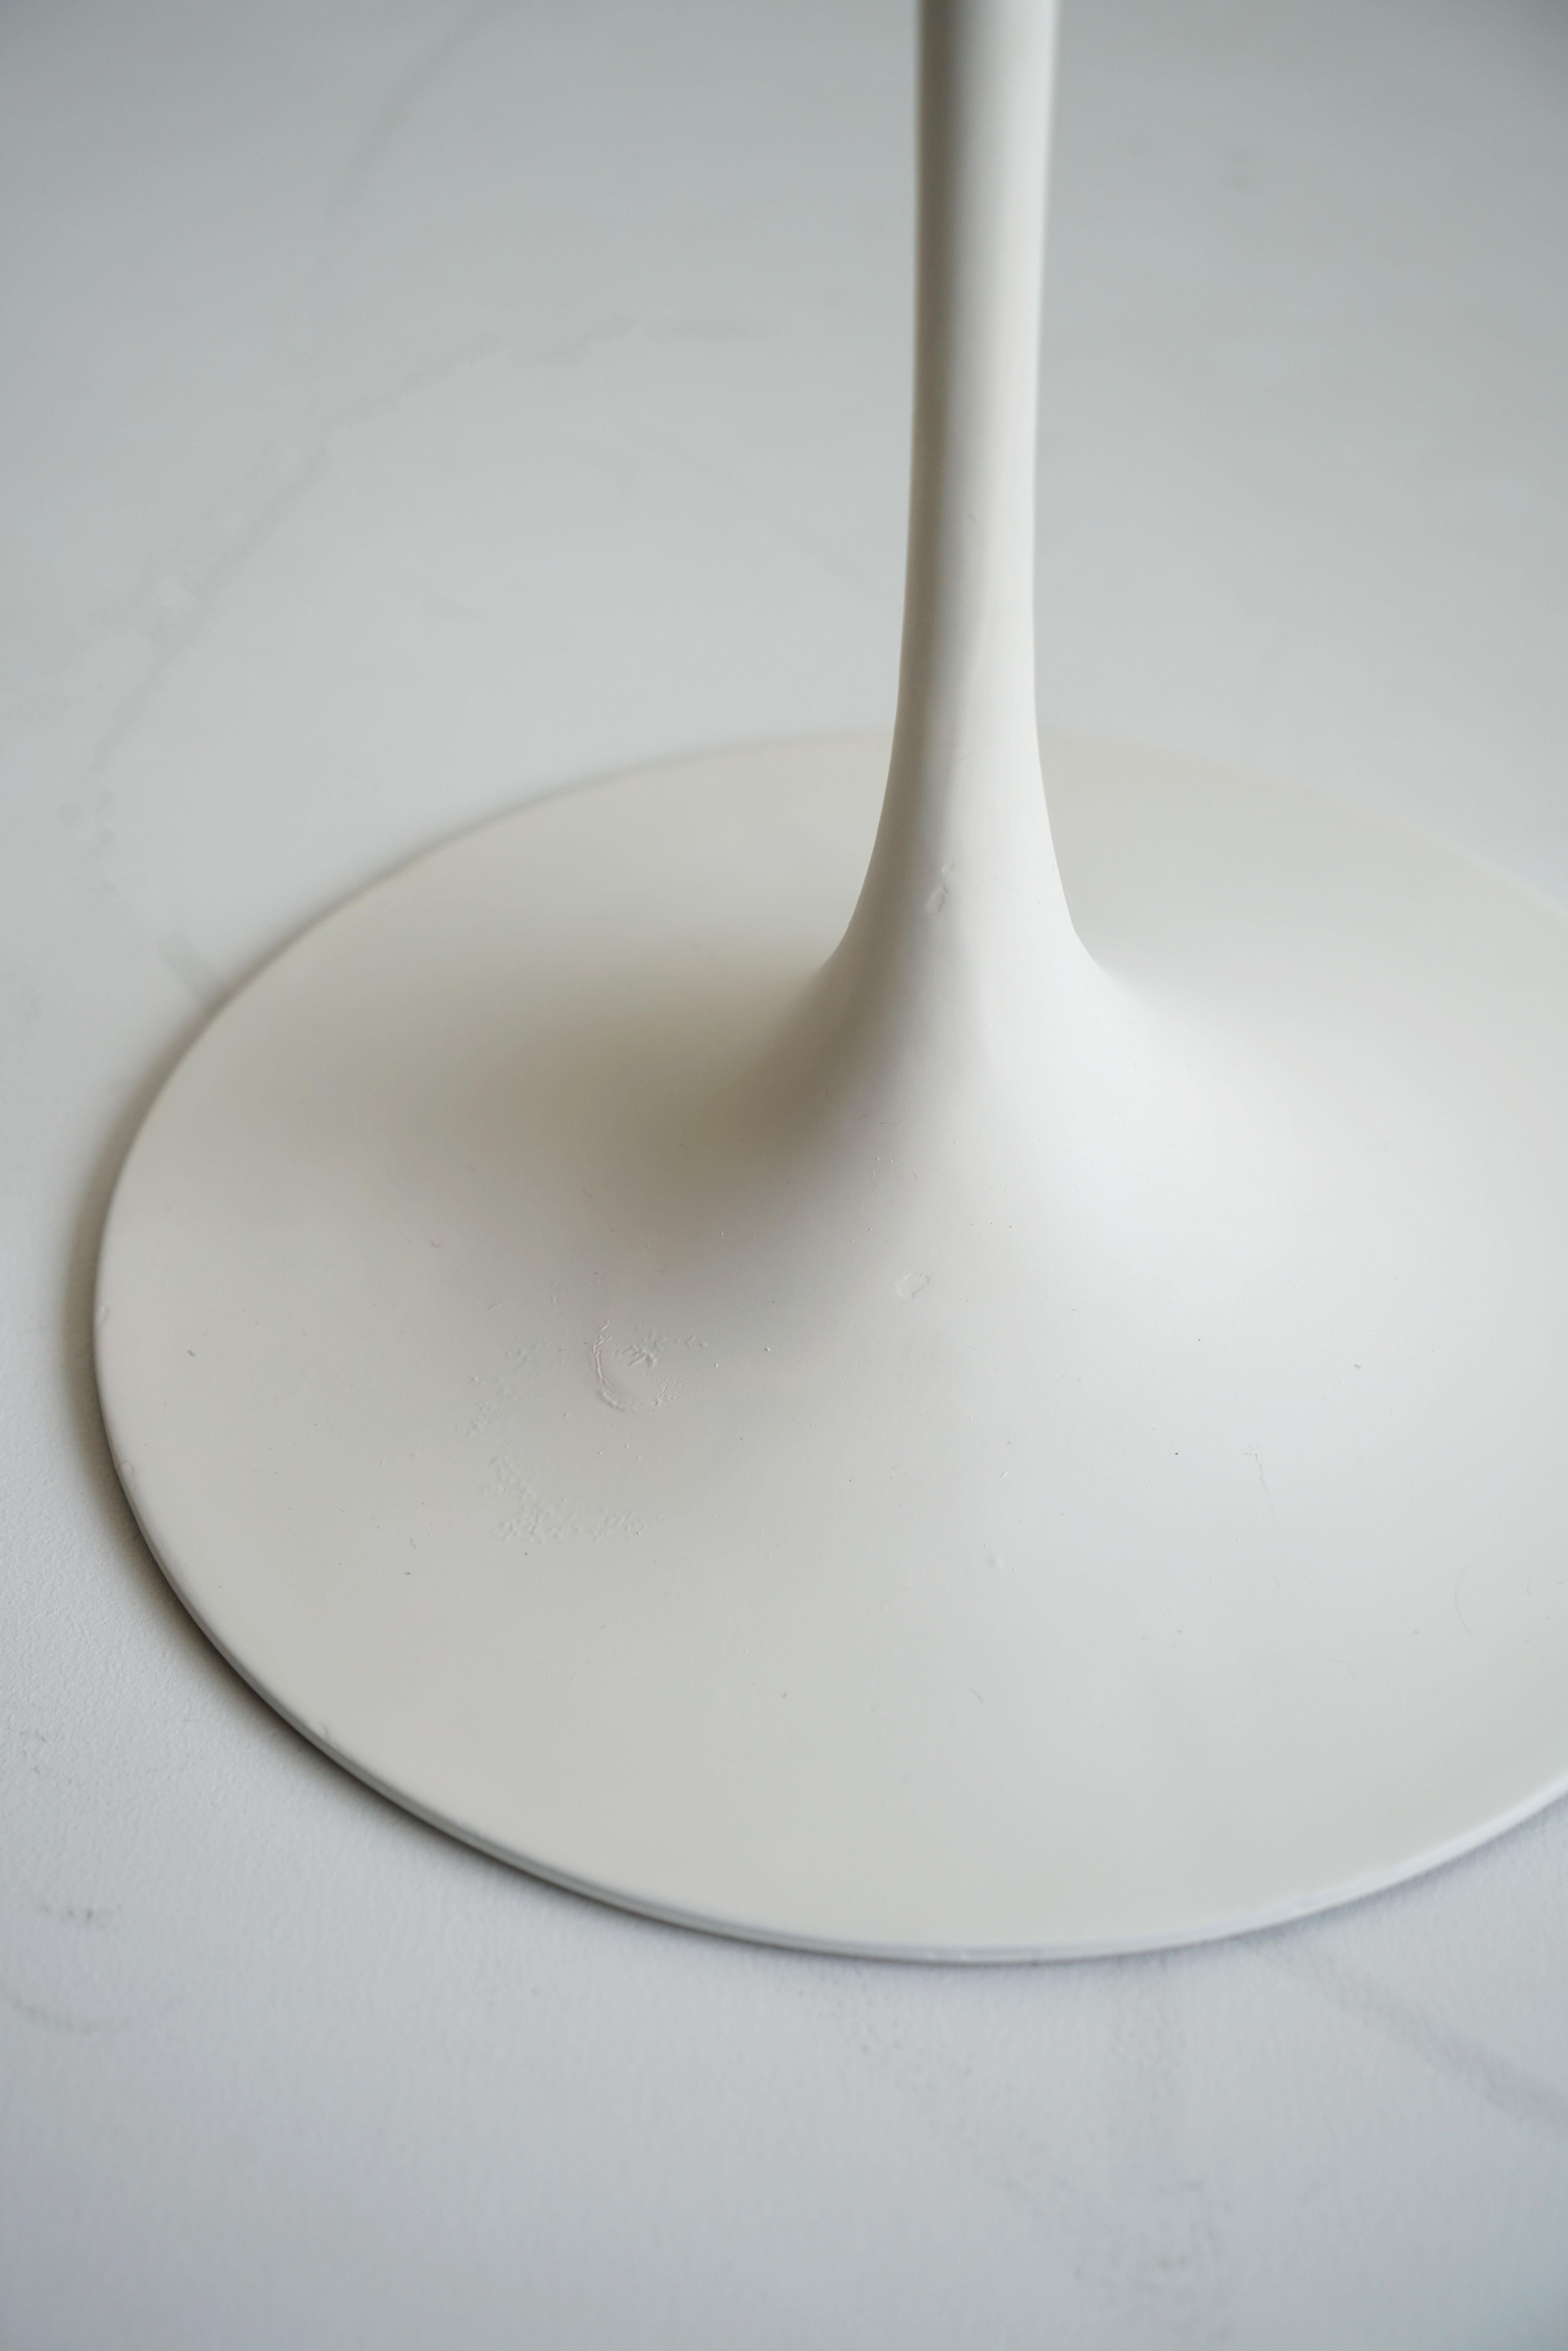 Very early Eero Saarinen for Knoll Tulip table, oval shaped top circa 1957 For Sale 3